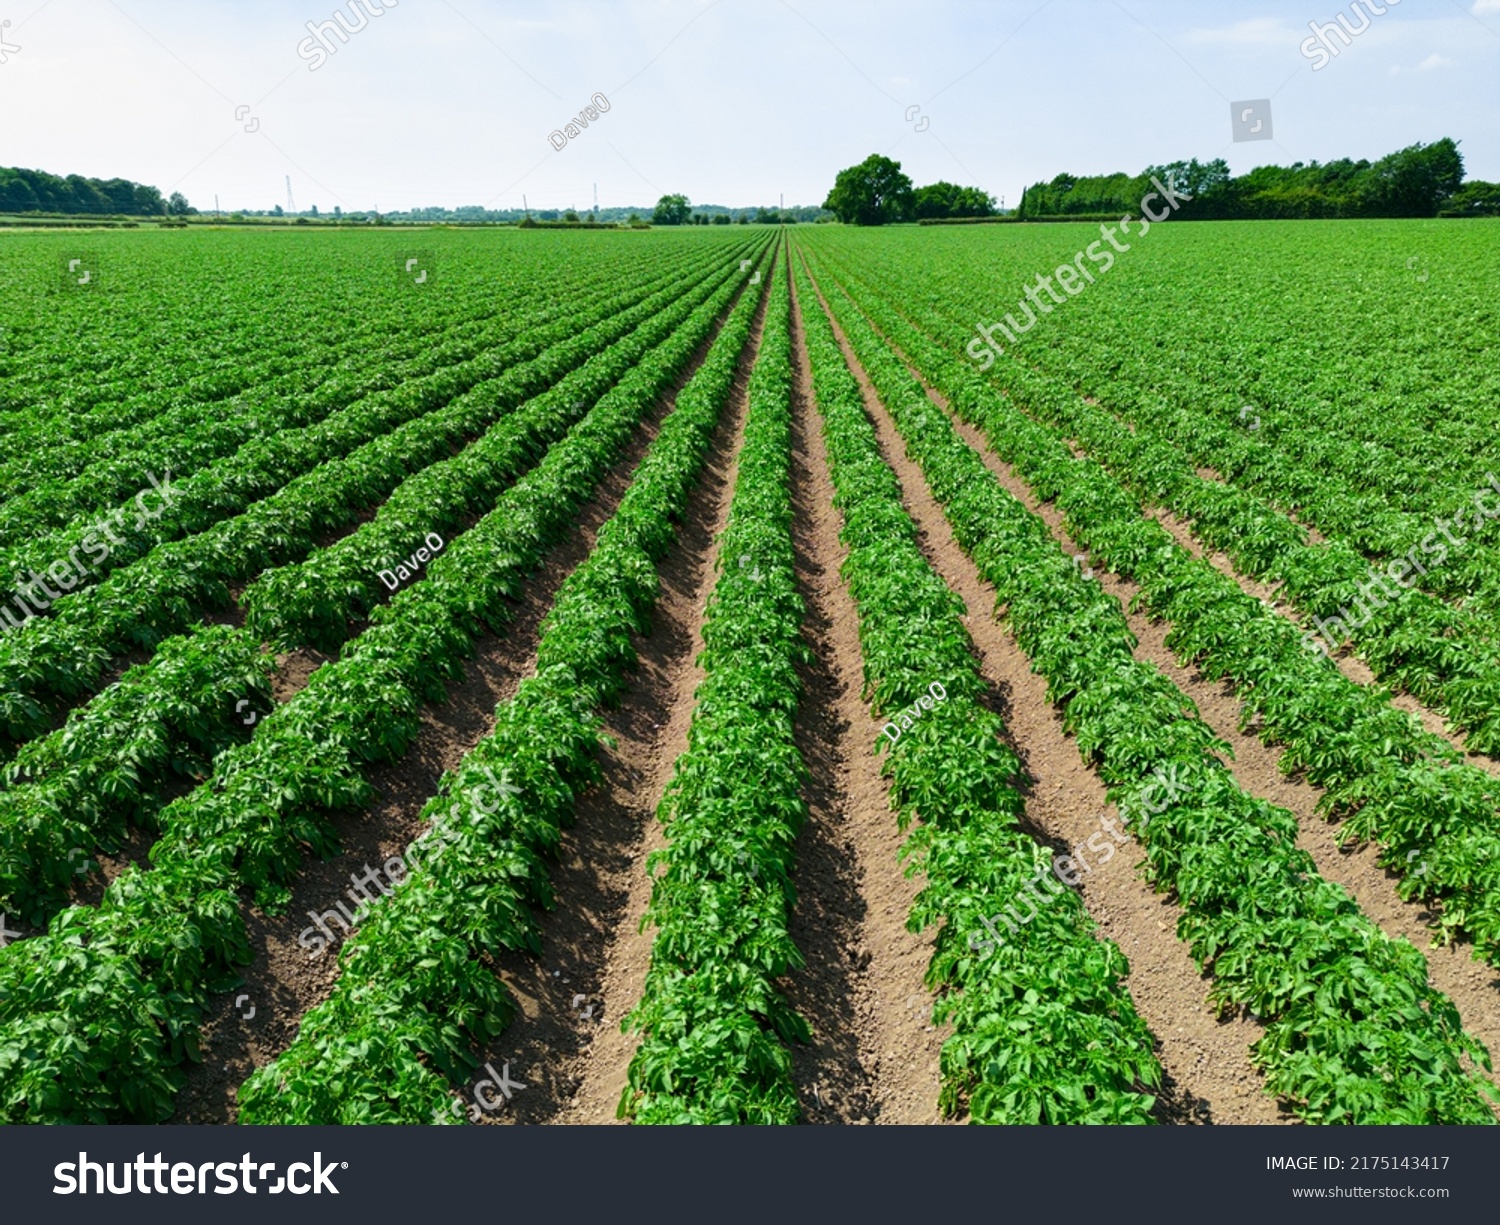 Low level aerial image of a crop of potatoes in a ploughed arable field in the British countryside farmland #2175143417